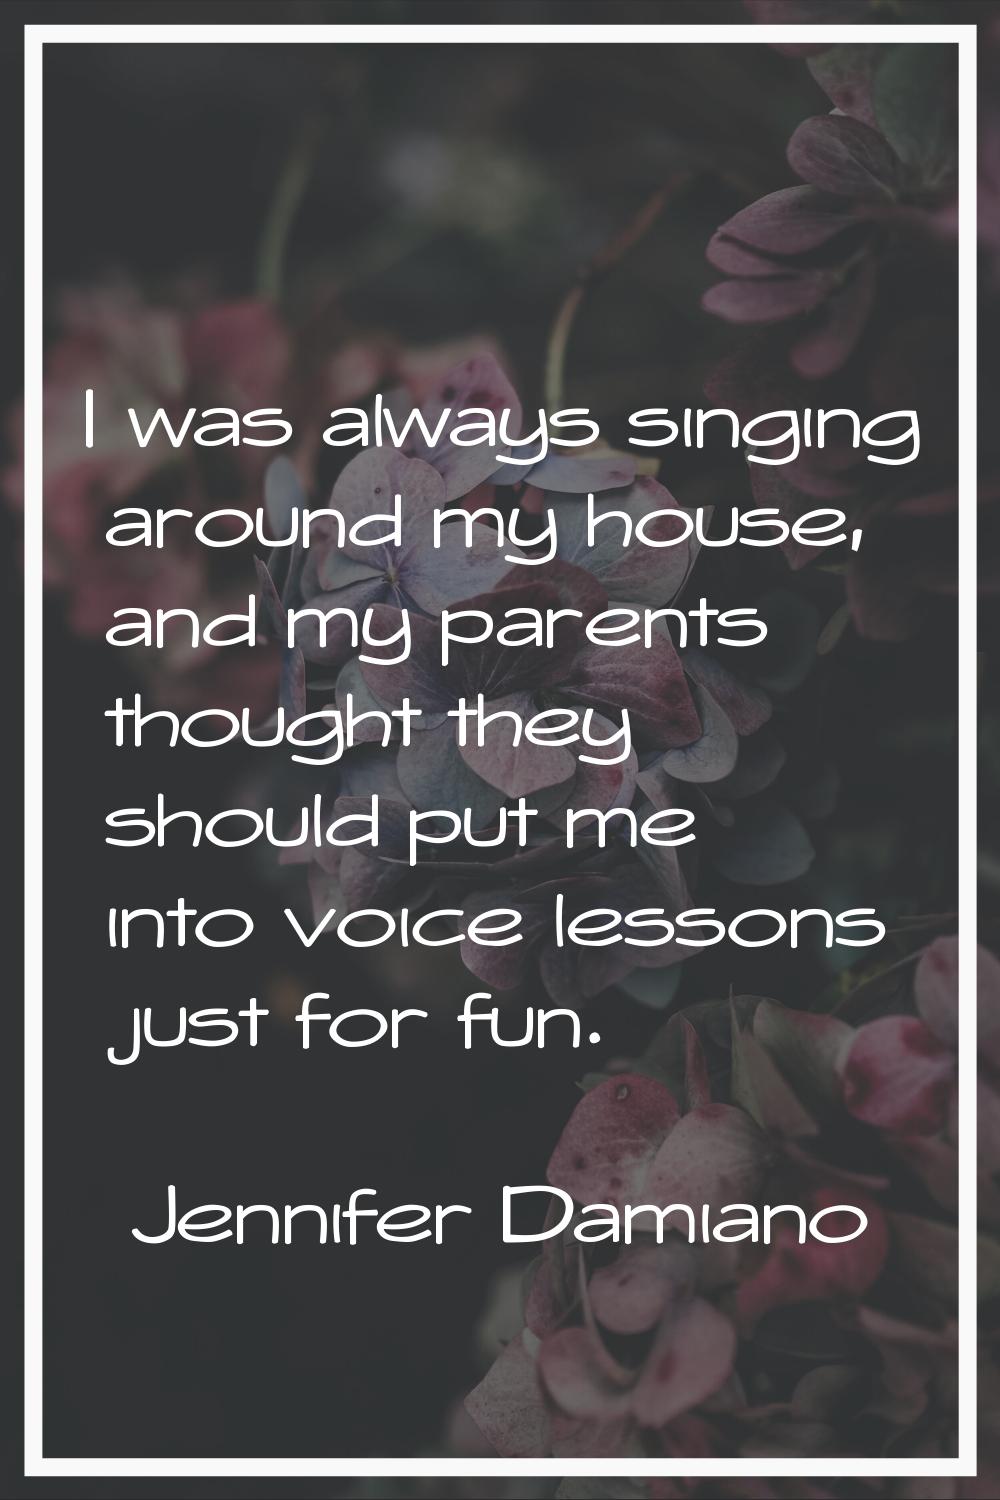 I was always singing around my house, and my parents thought they should put me into voice lessons 